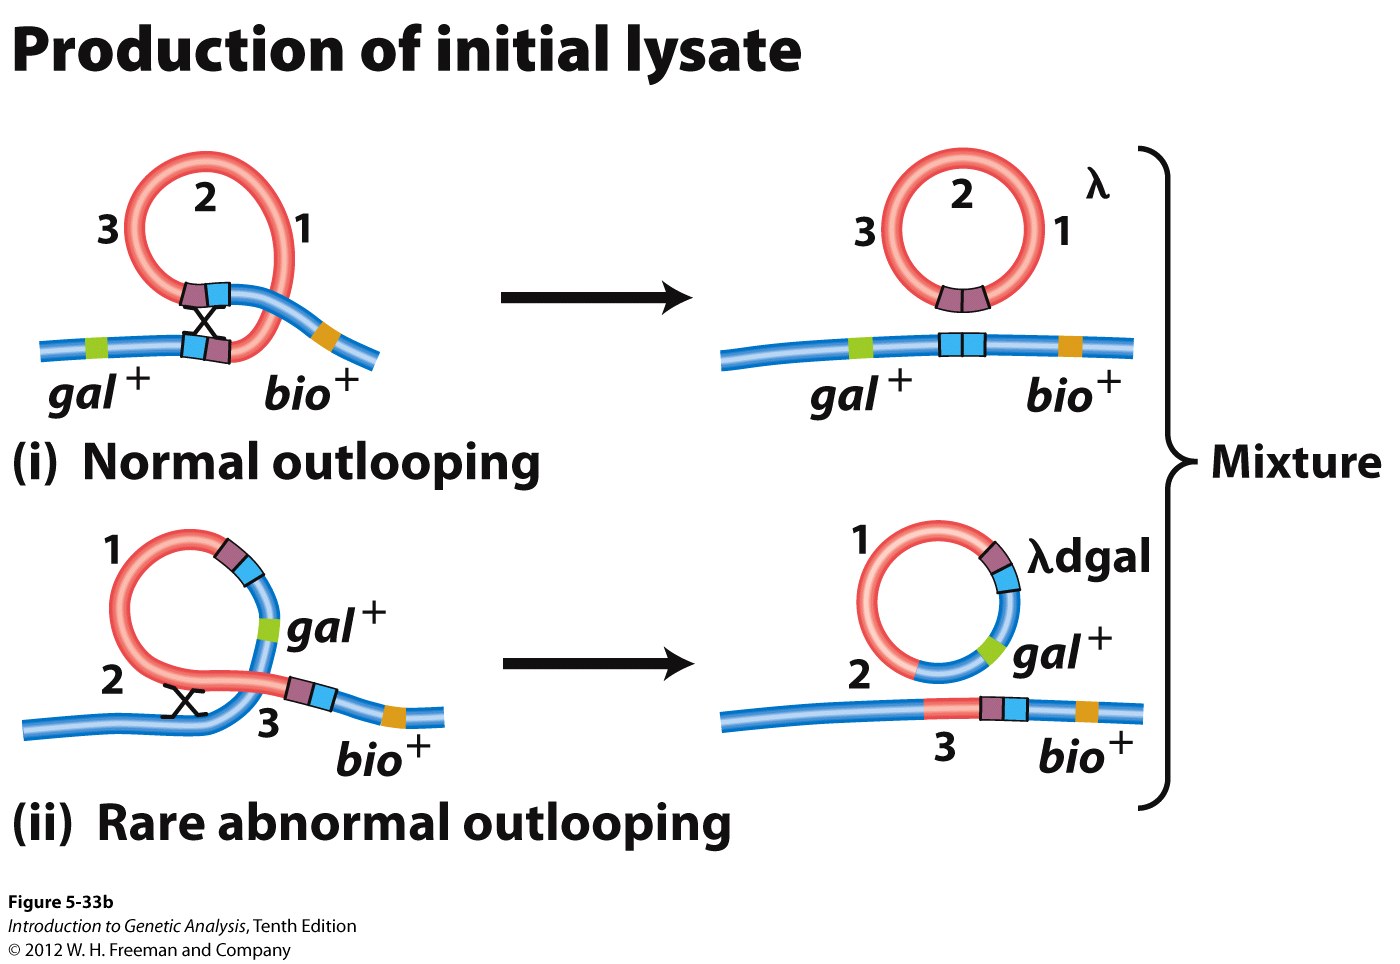 Faulty outlooping produces lambda phage containing bacterial DNA